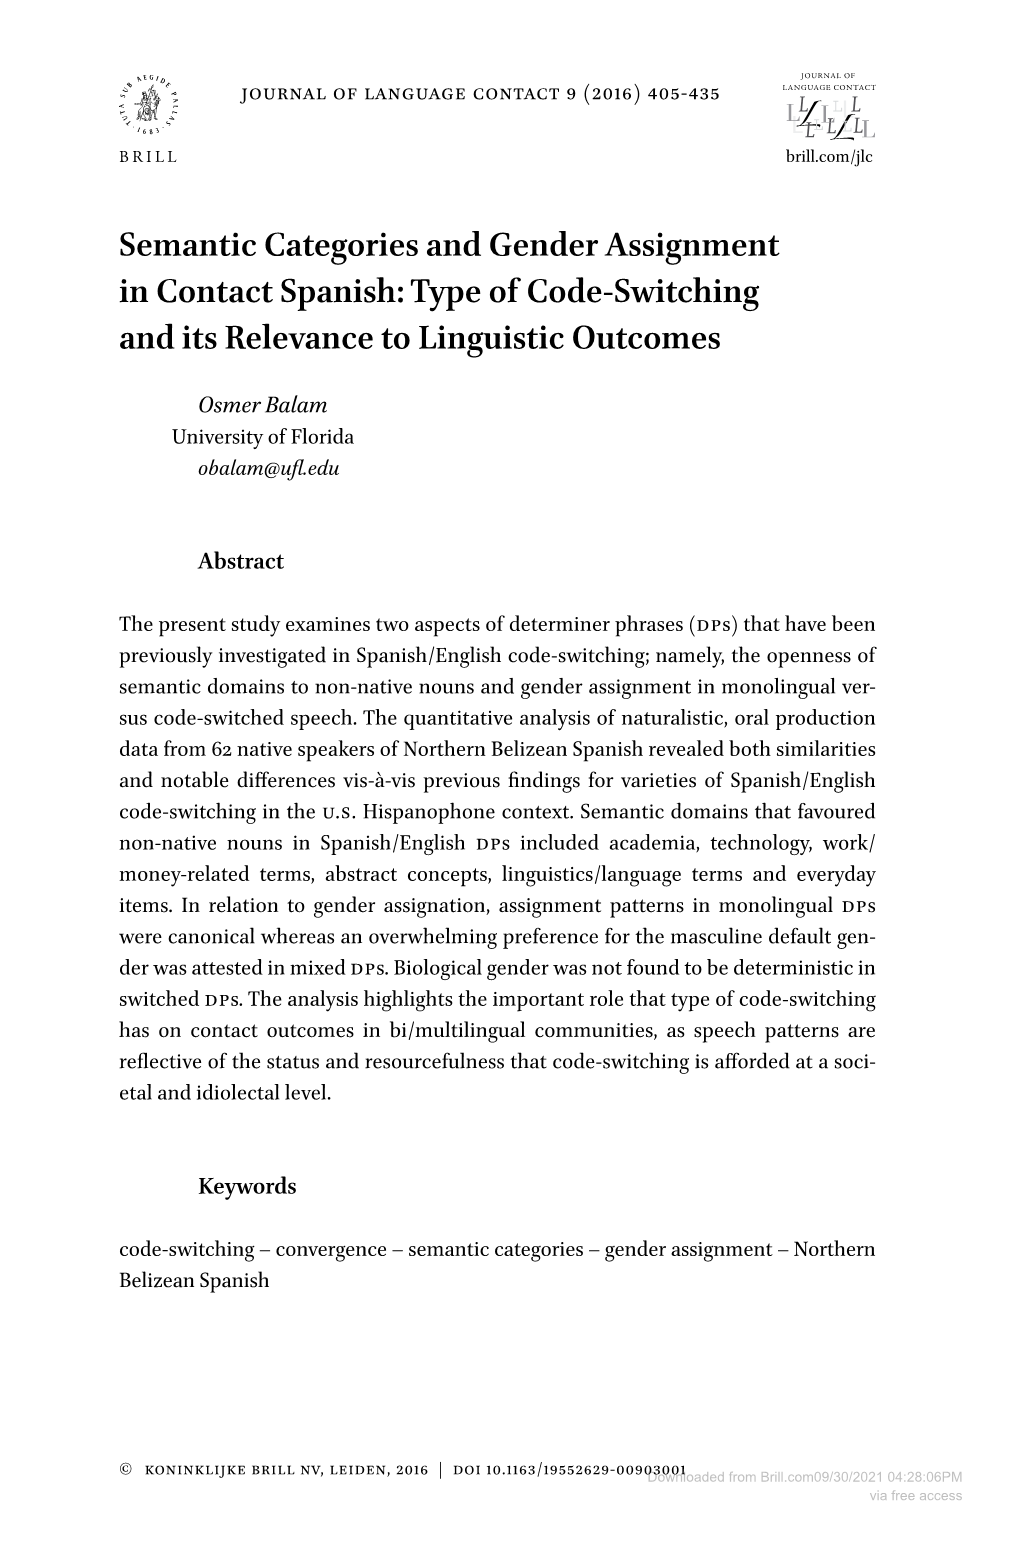 Semantic Categories and Gender Assignment in Contact Spanish: Type of Code-Switching and Its Relevance to Linguistic Outcomes